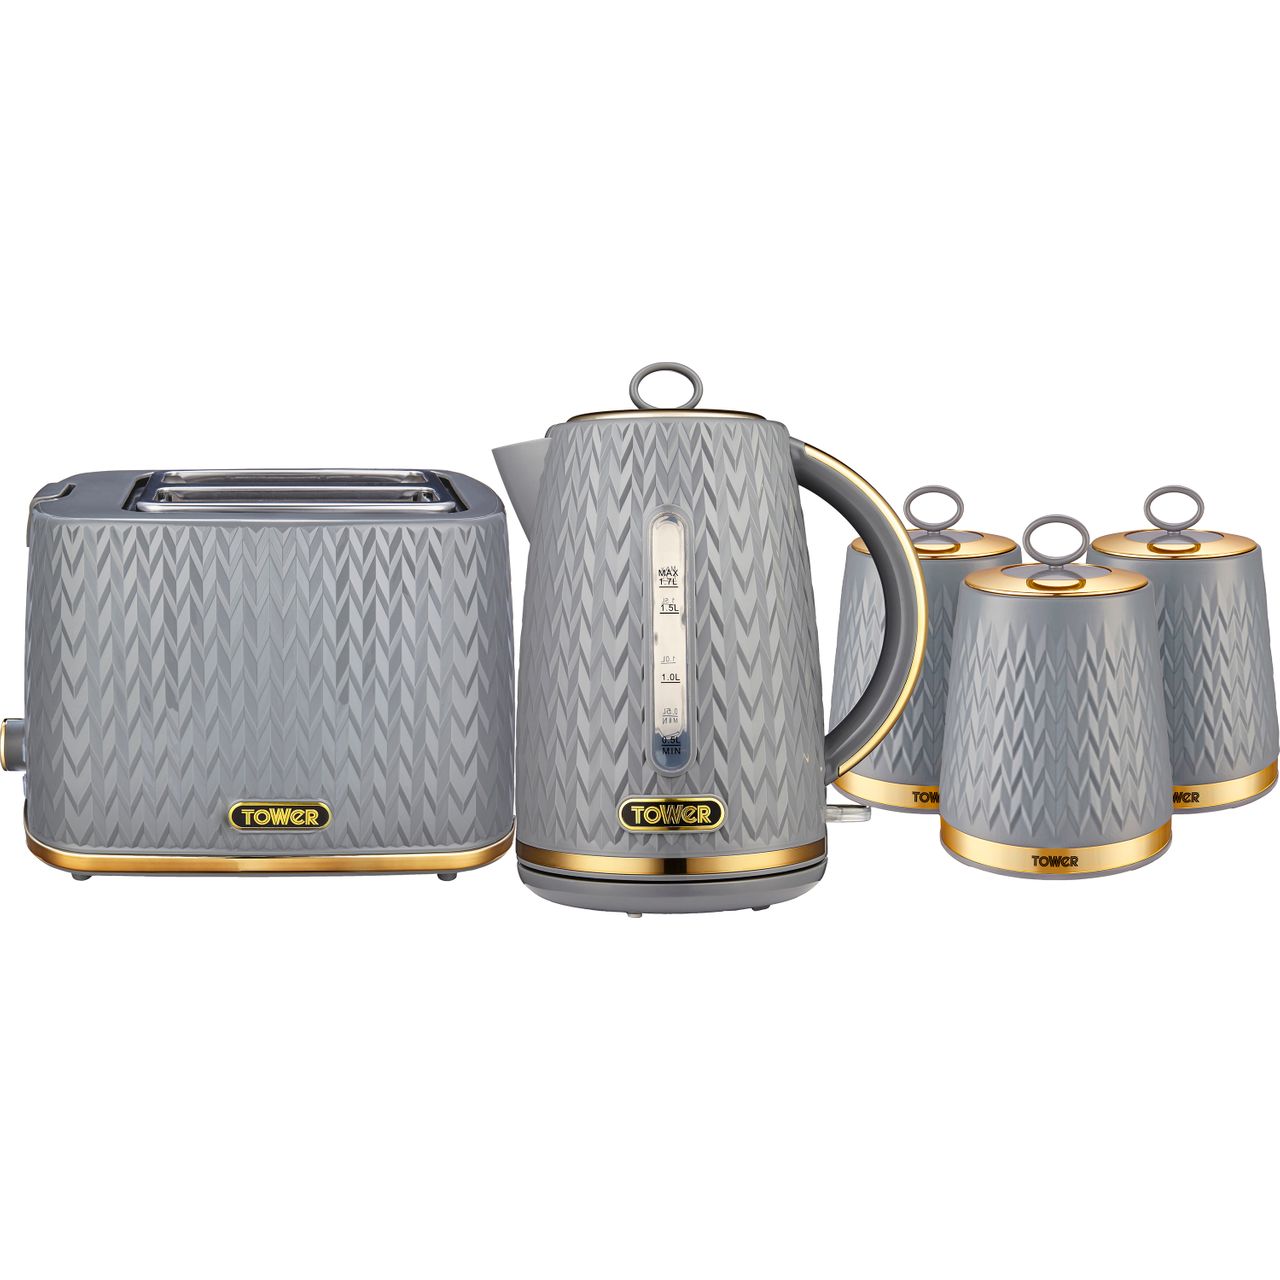 Tower Empire AOBUNDLE019 Kettle And Toaster Sets Review